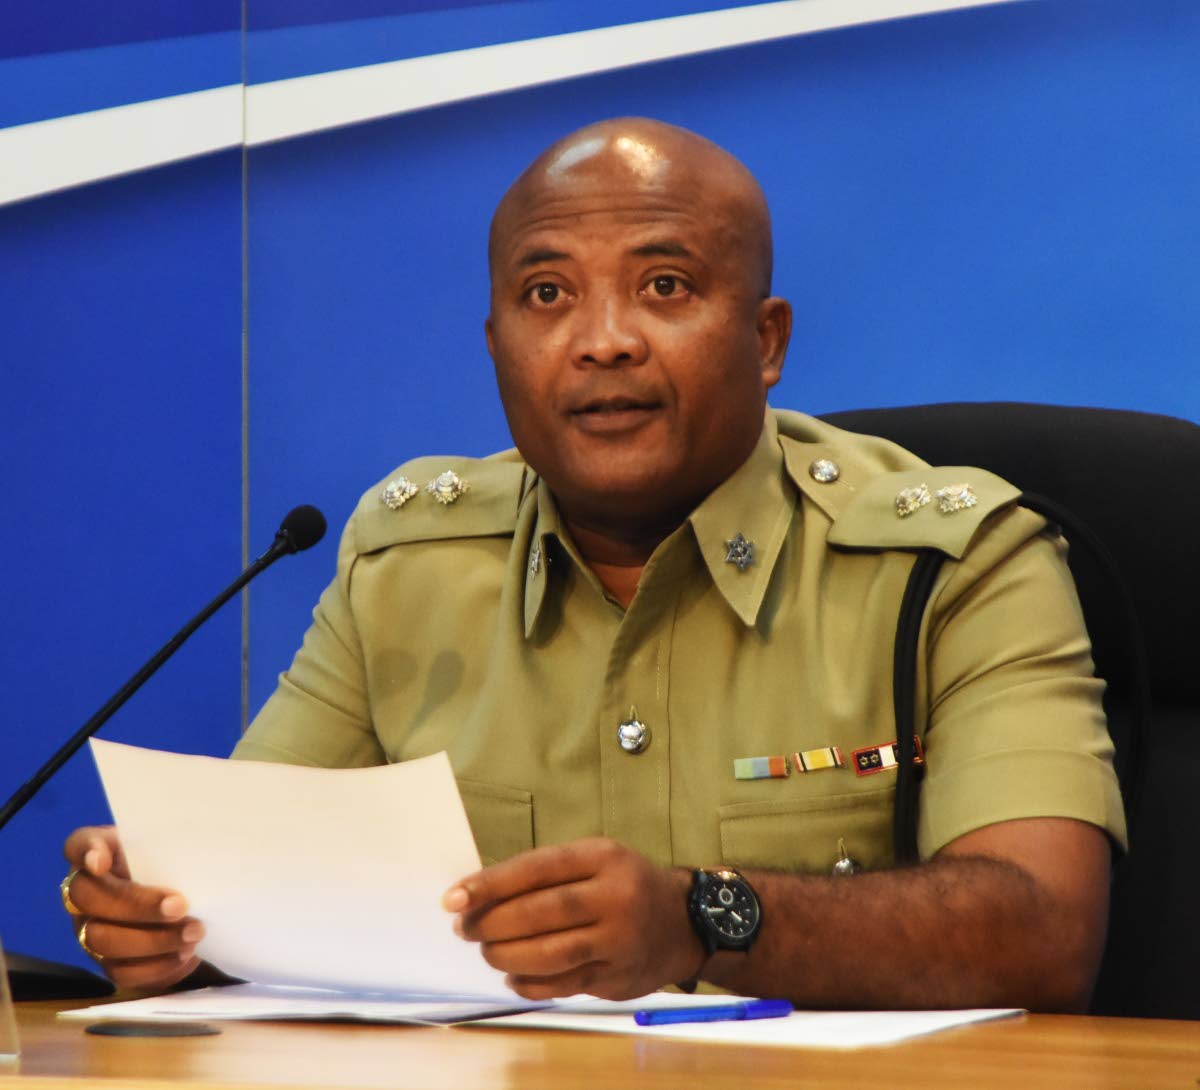 TTPS Warns Drivers On Reckless Driving, WPC Seriously Injured On Highway